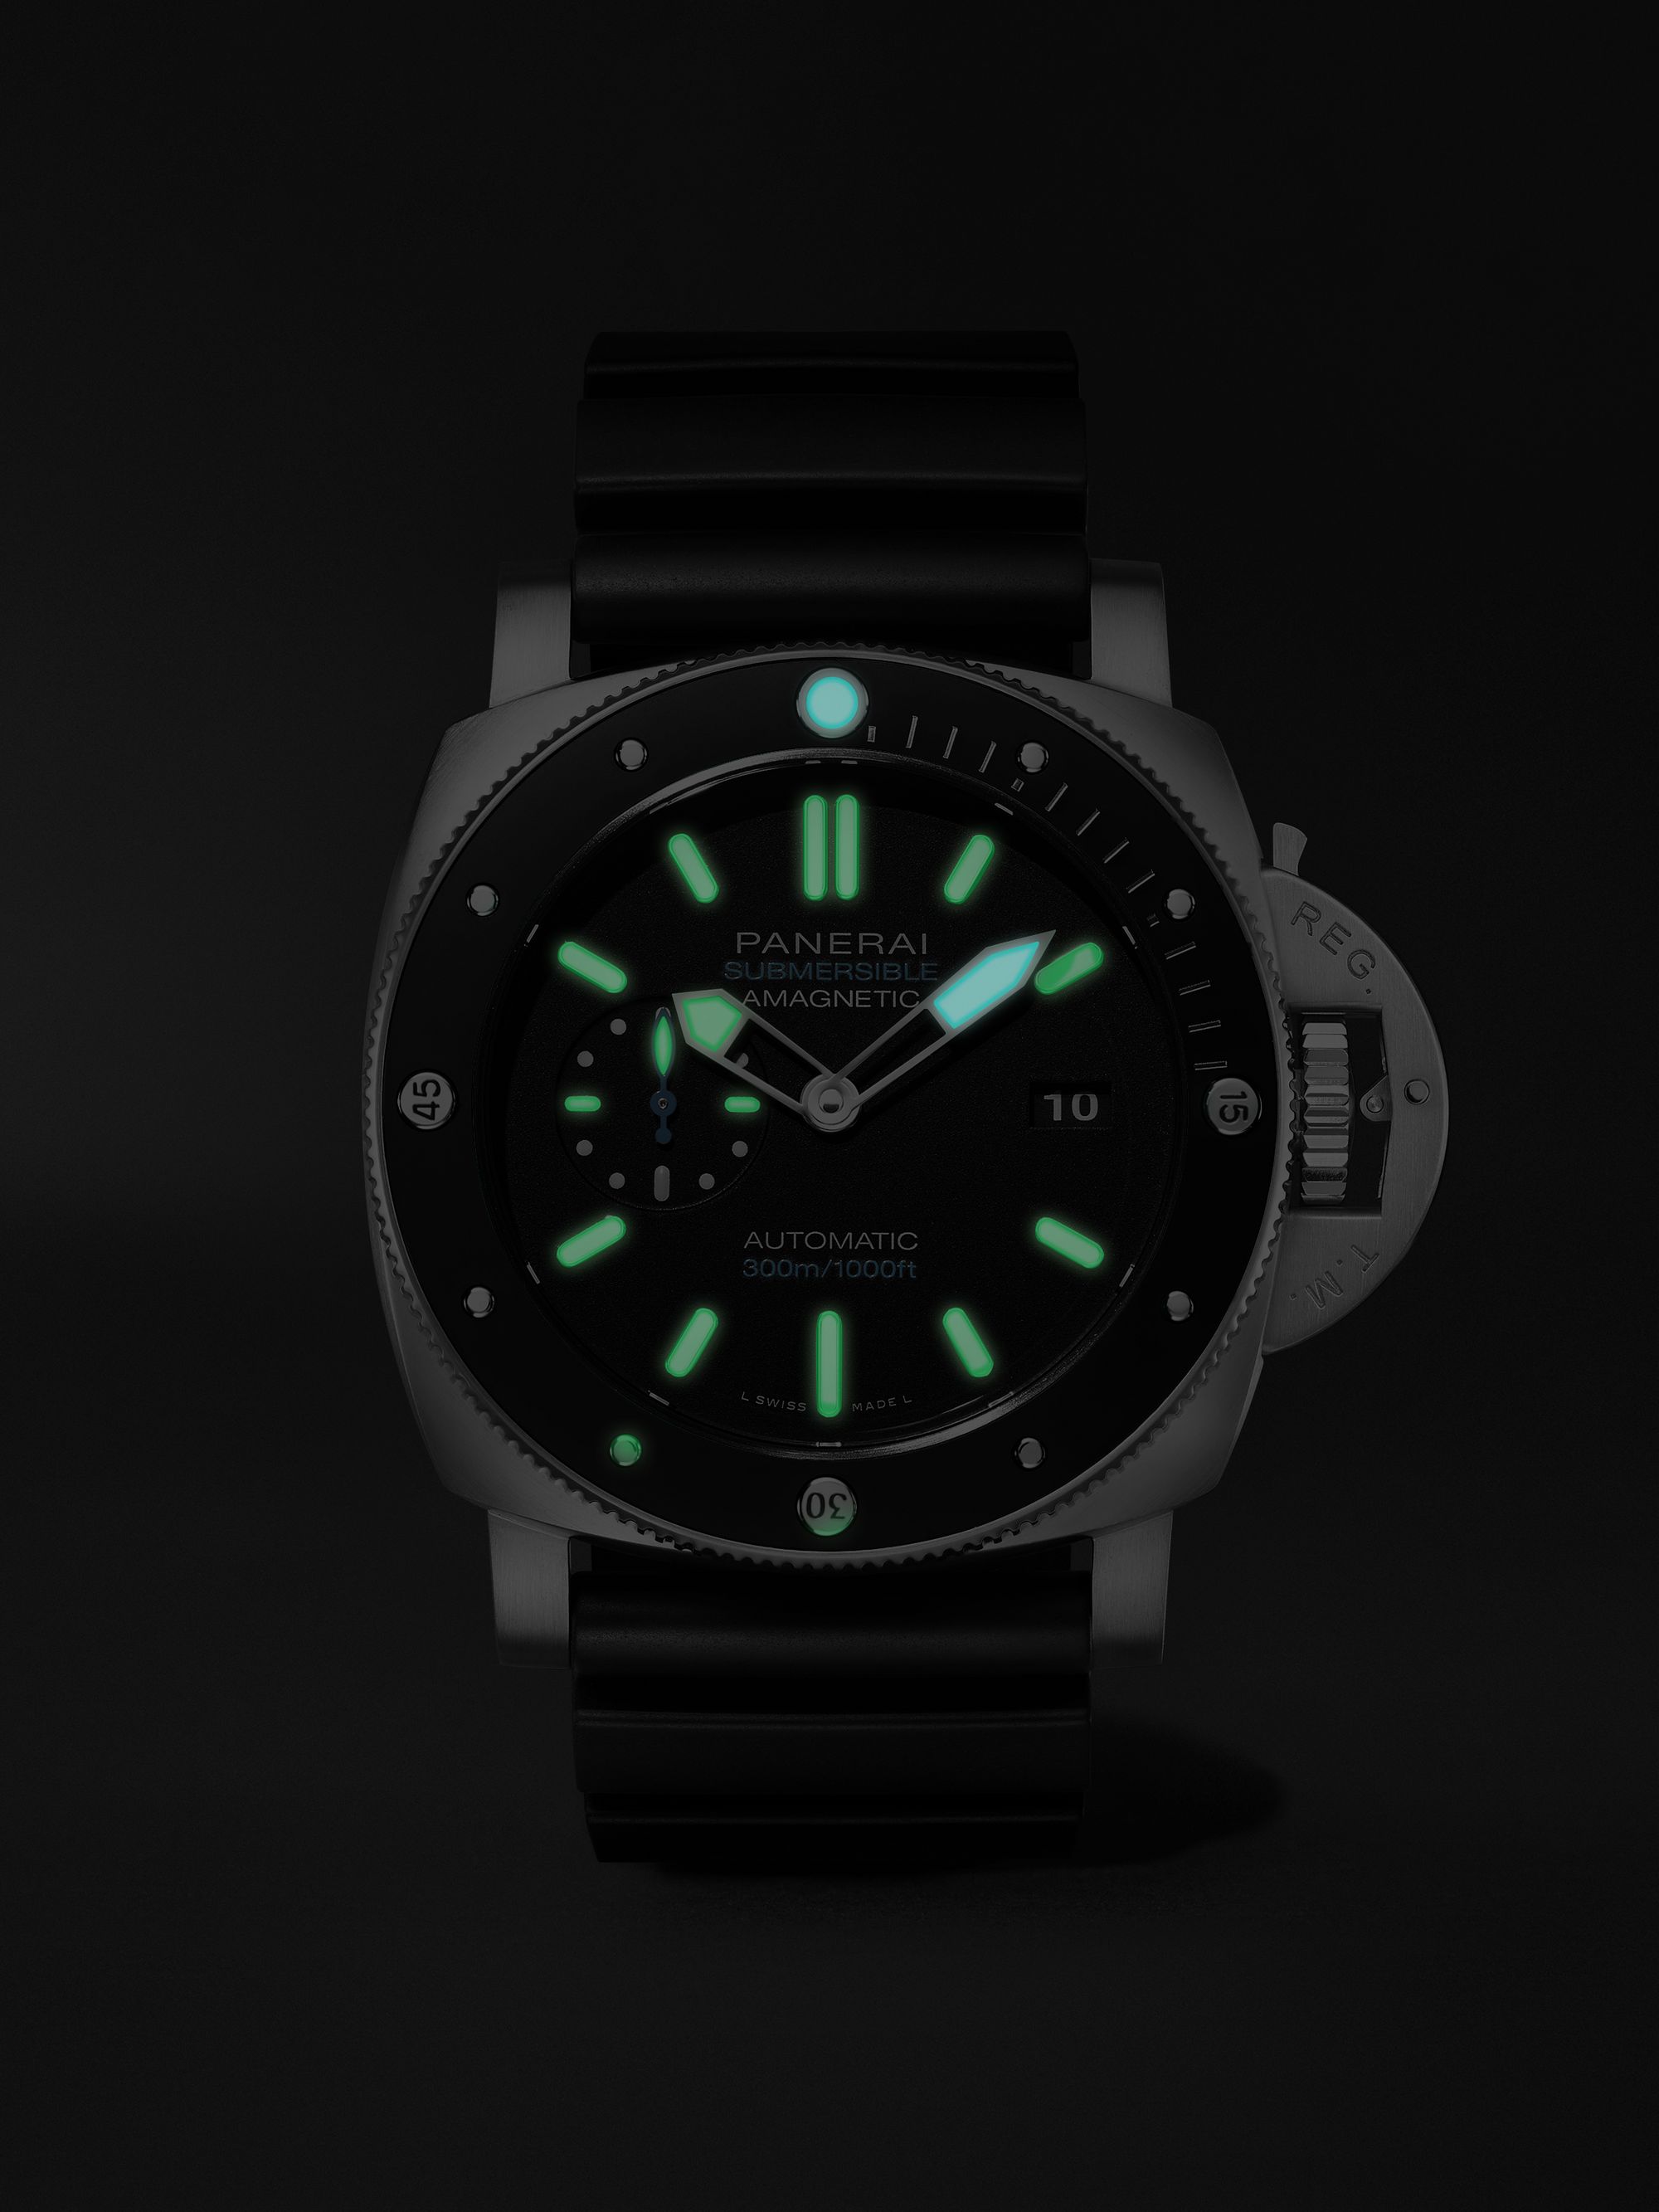 PANERAI Luminor Submersible Amagnetic Automatic 47mm Titanium and Rubber Watch, Ref. No. PAM01389